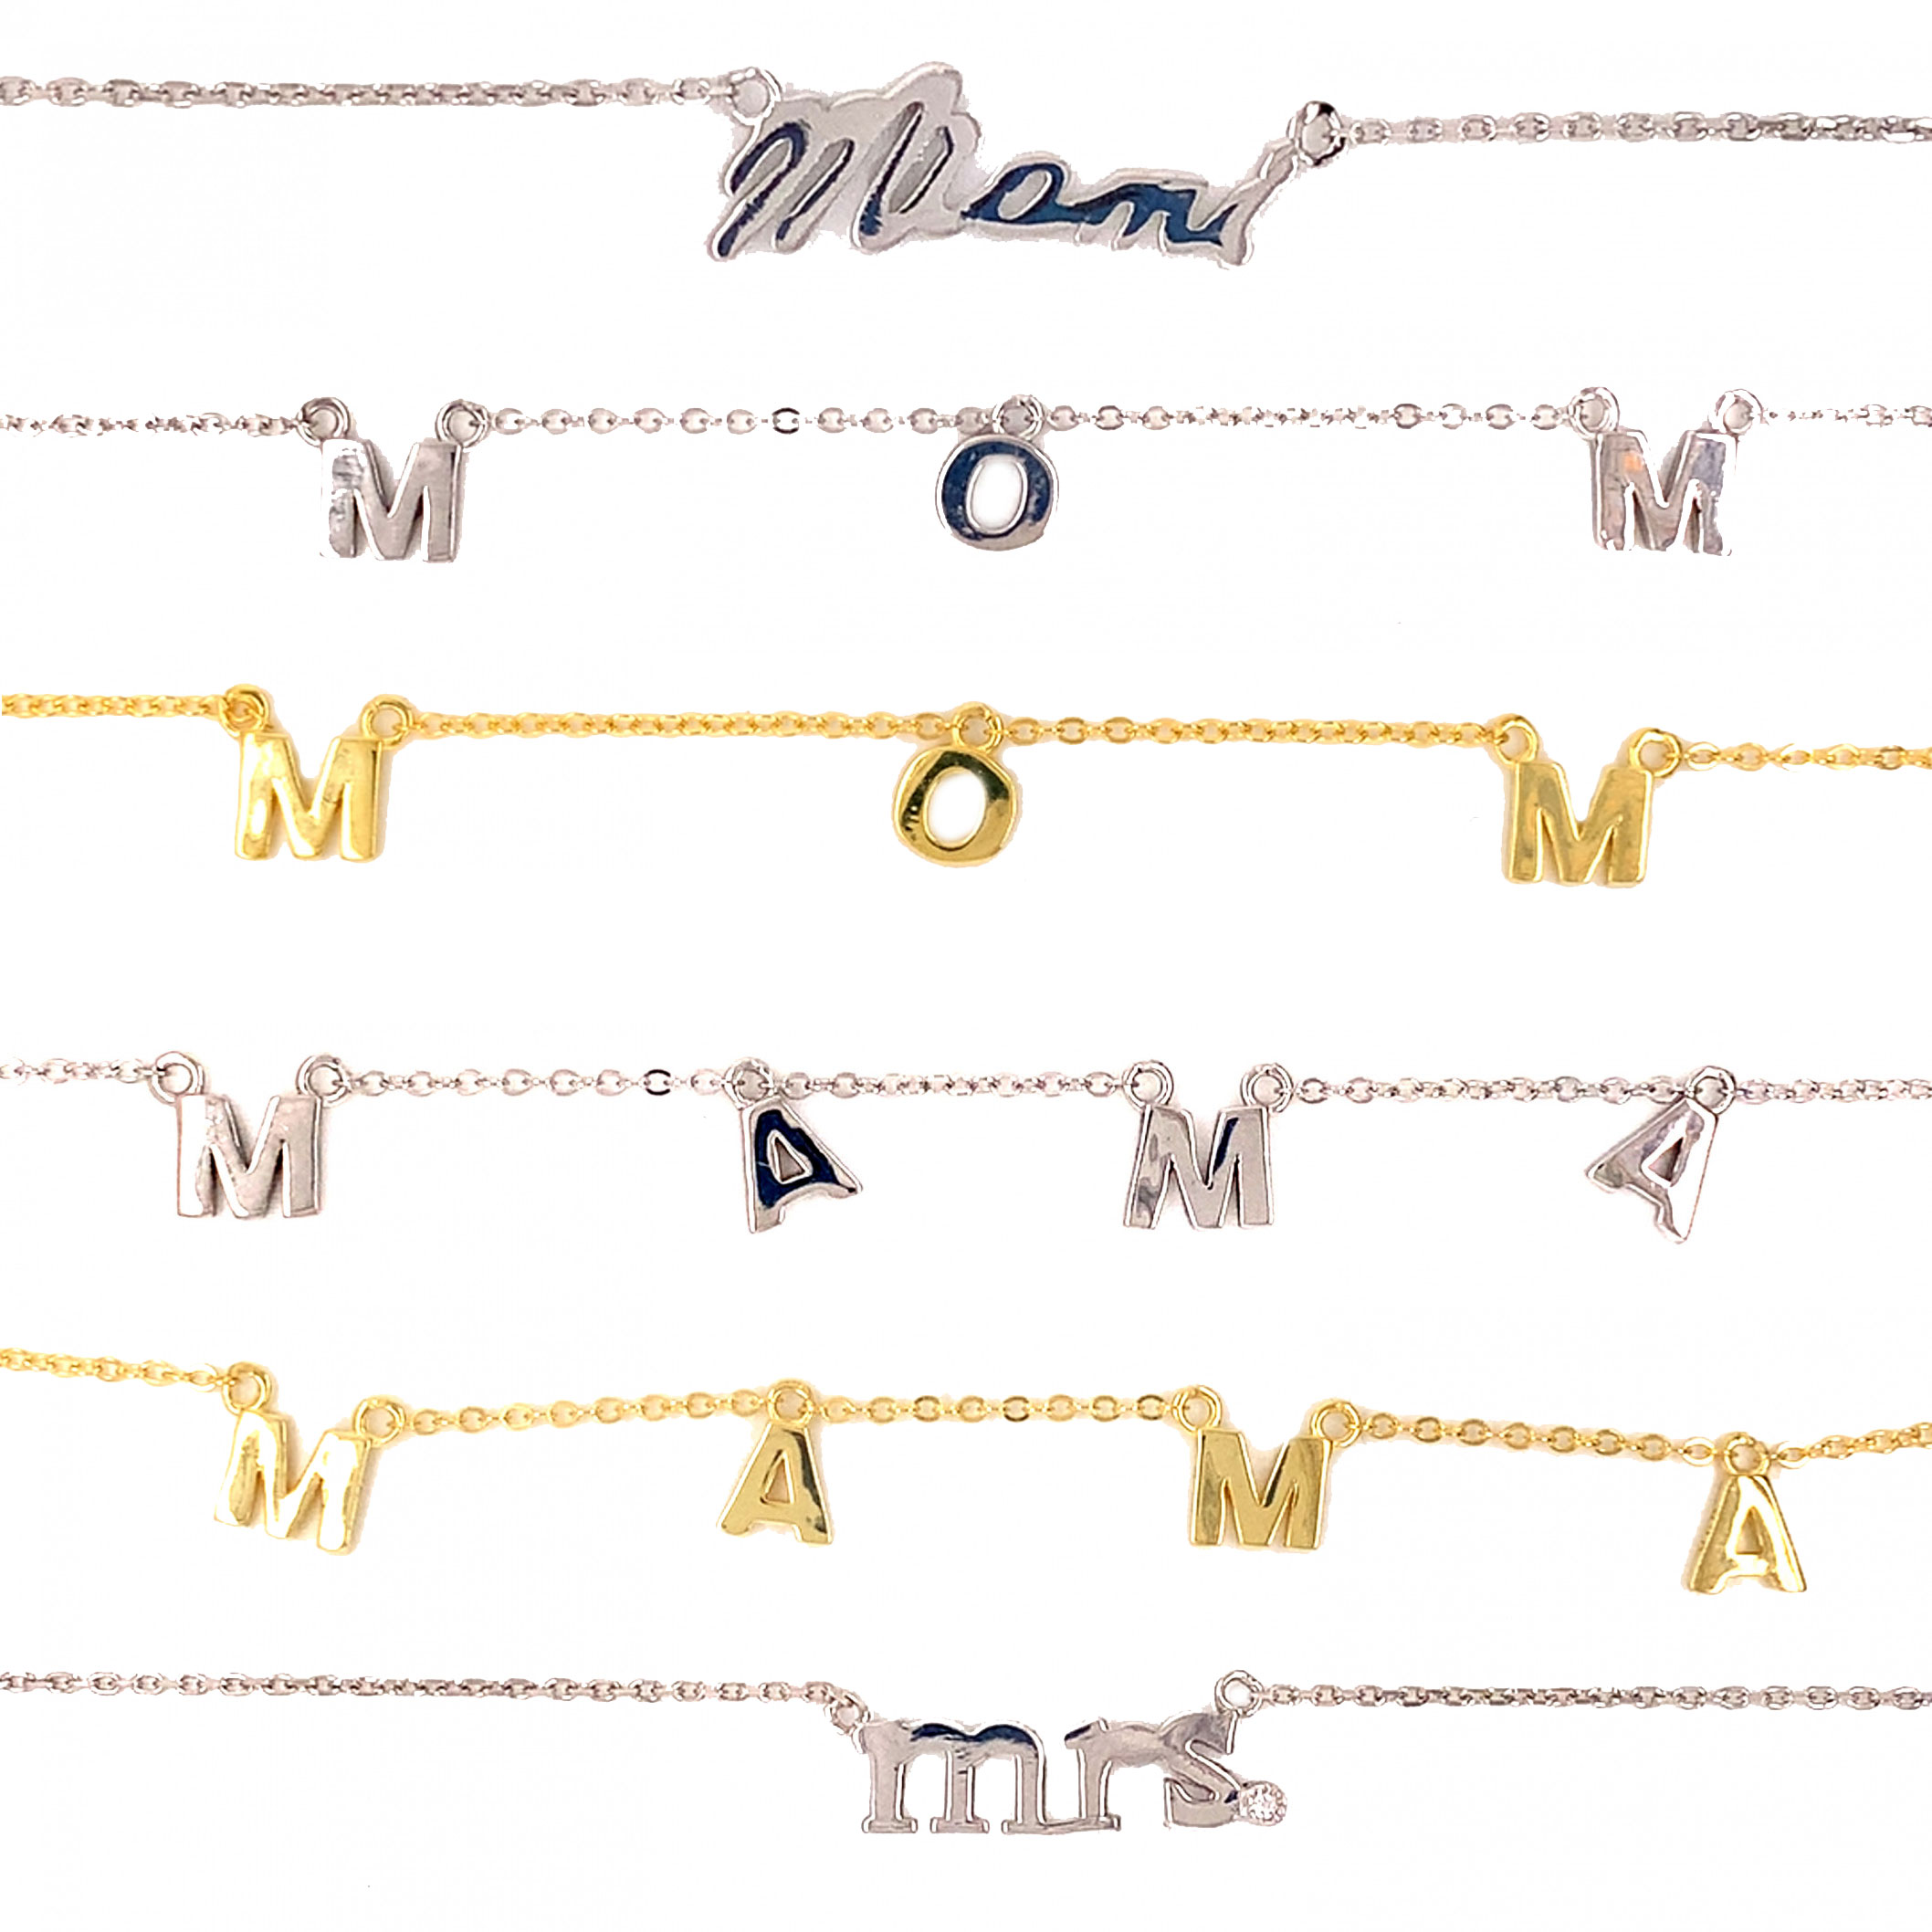 INITIAL & WORD NECKLACES